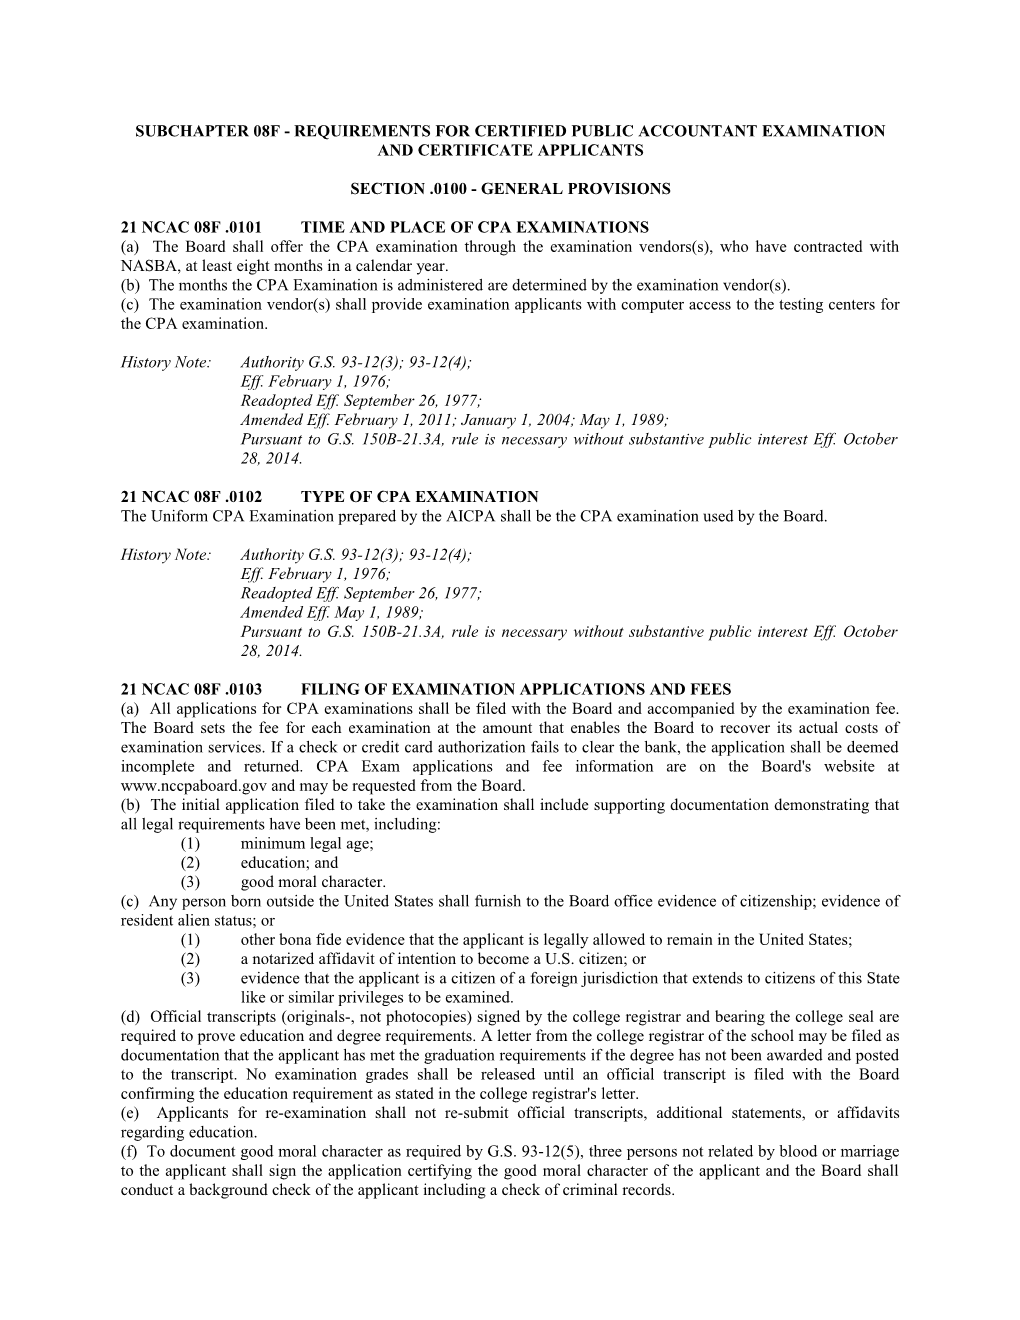 Subchapter 08F - REQUIREMENTS for CERTIFIED PUBLIC ACCOUNTANT EXAMINATION and CERTIFICATE